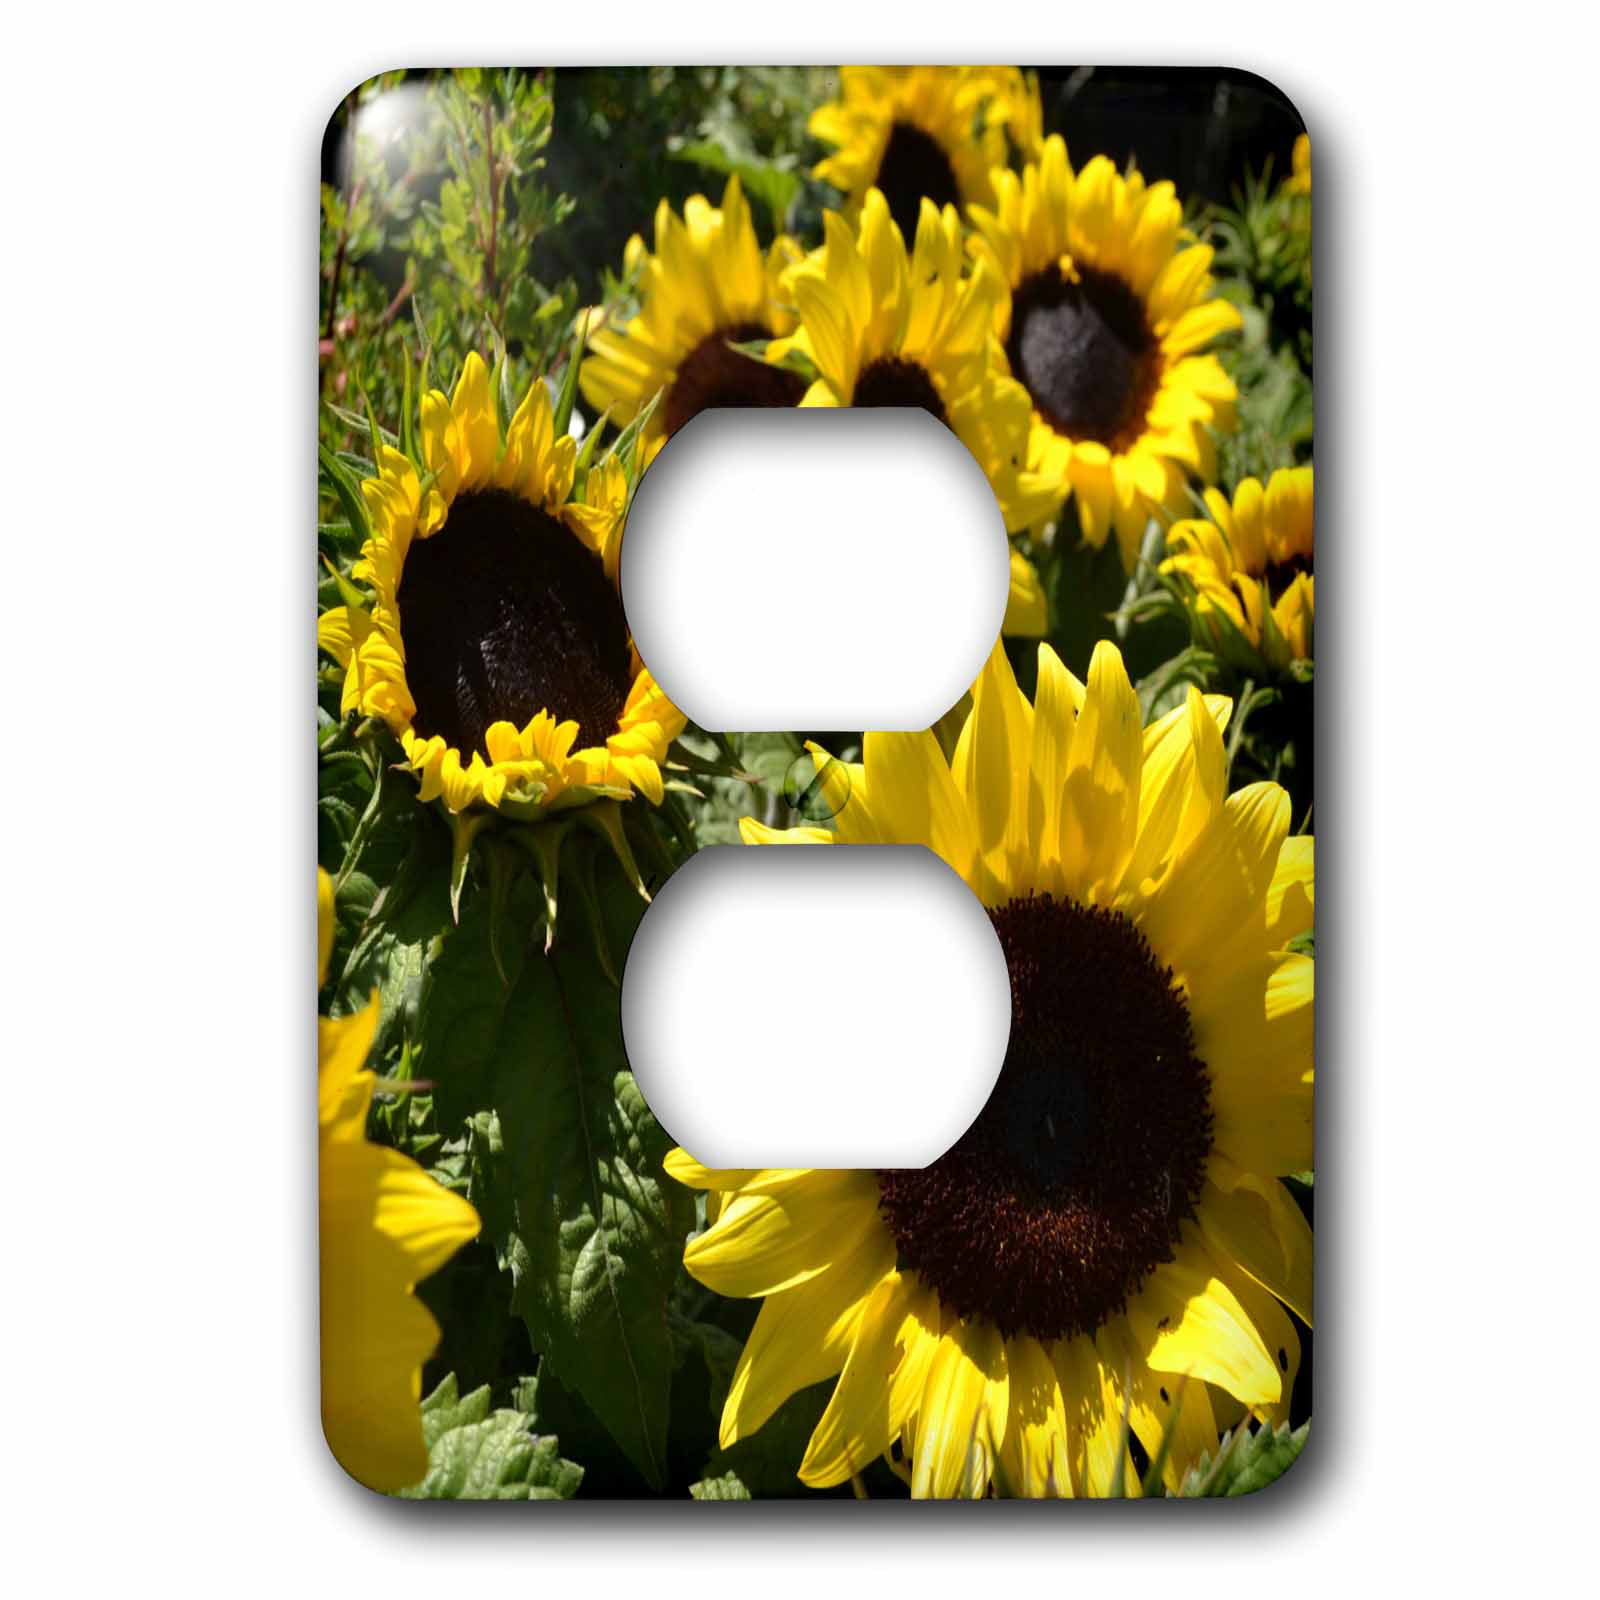 Decorative Switch Plate Cover for Bedroom Sunflower Floral Lattice Checkered Light Switch Wall Plate Light Switch Wall Plate kitchen 